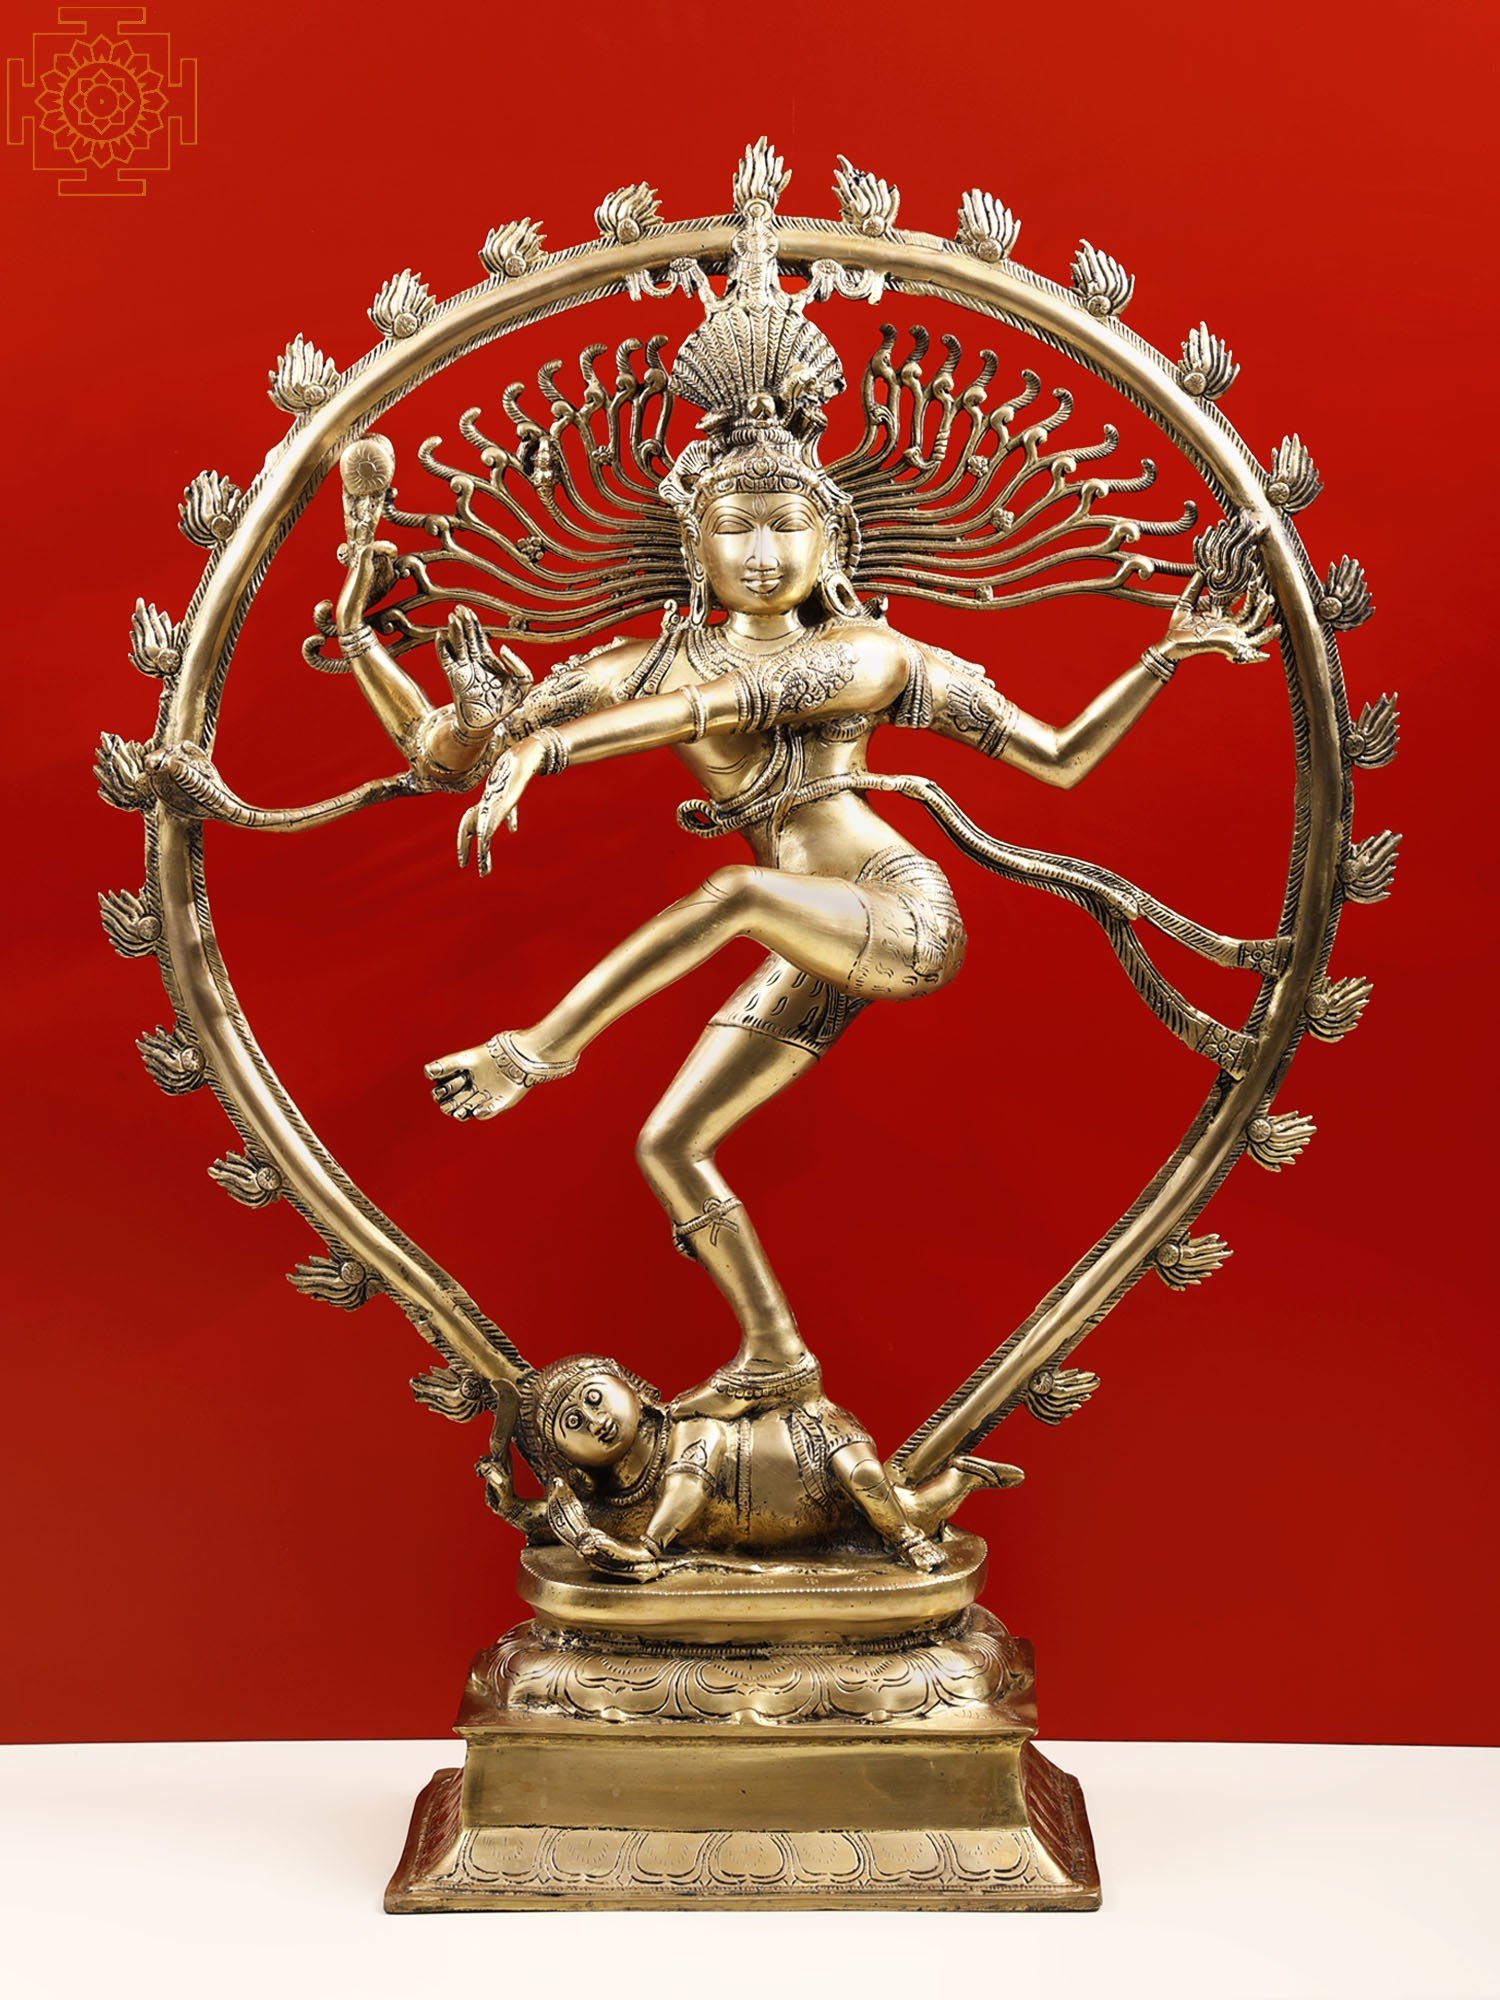 Found a nice picture of Nataraja : r/hinduism